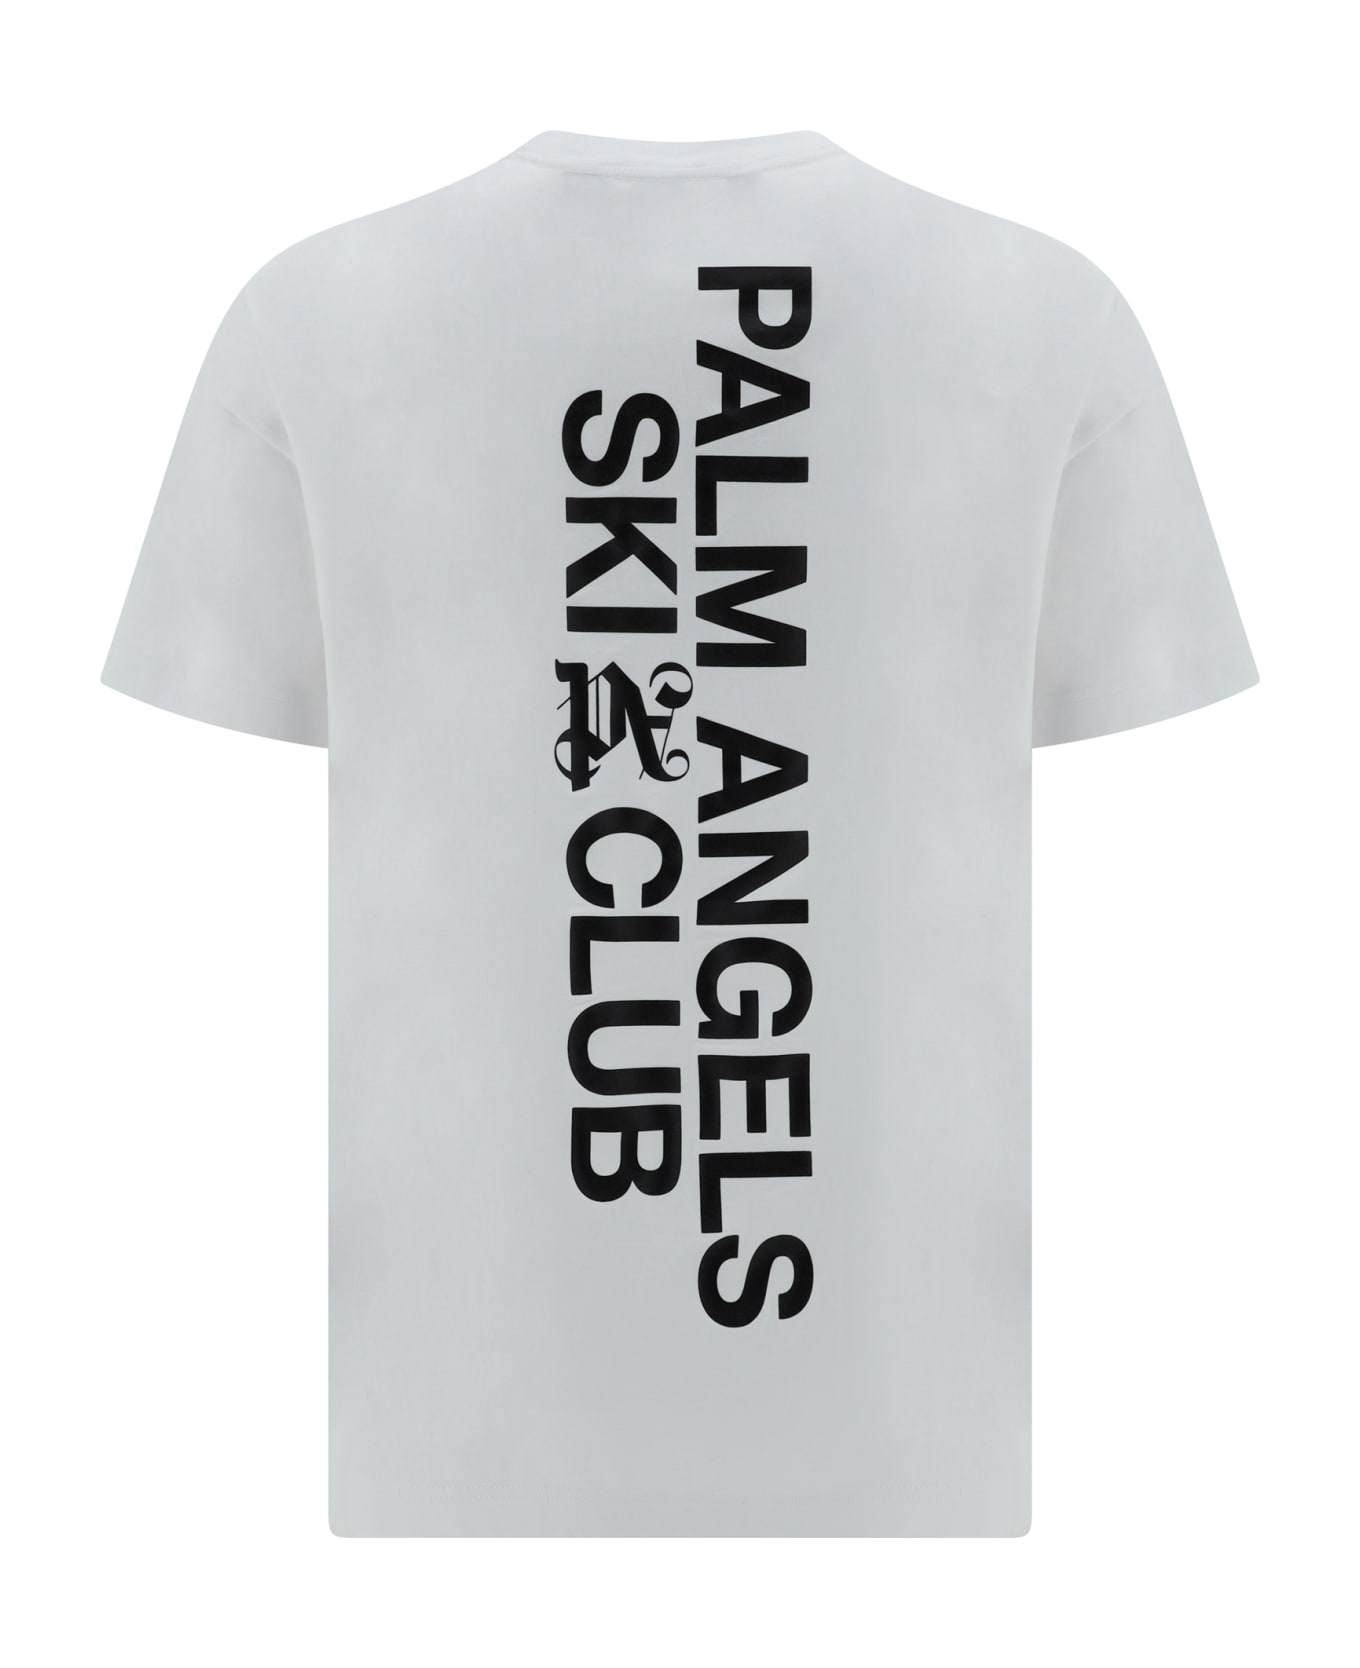 Palm Angels Cotton T-shirt With Logo - White Black シャツ